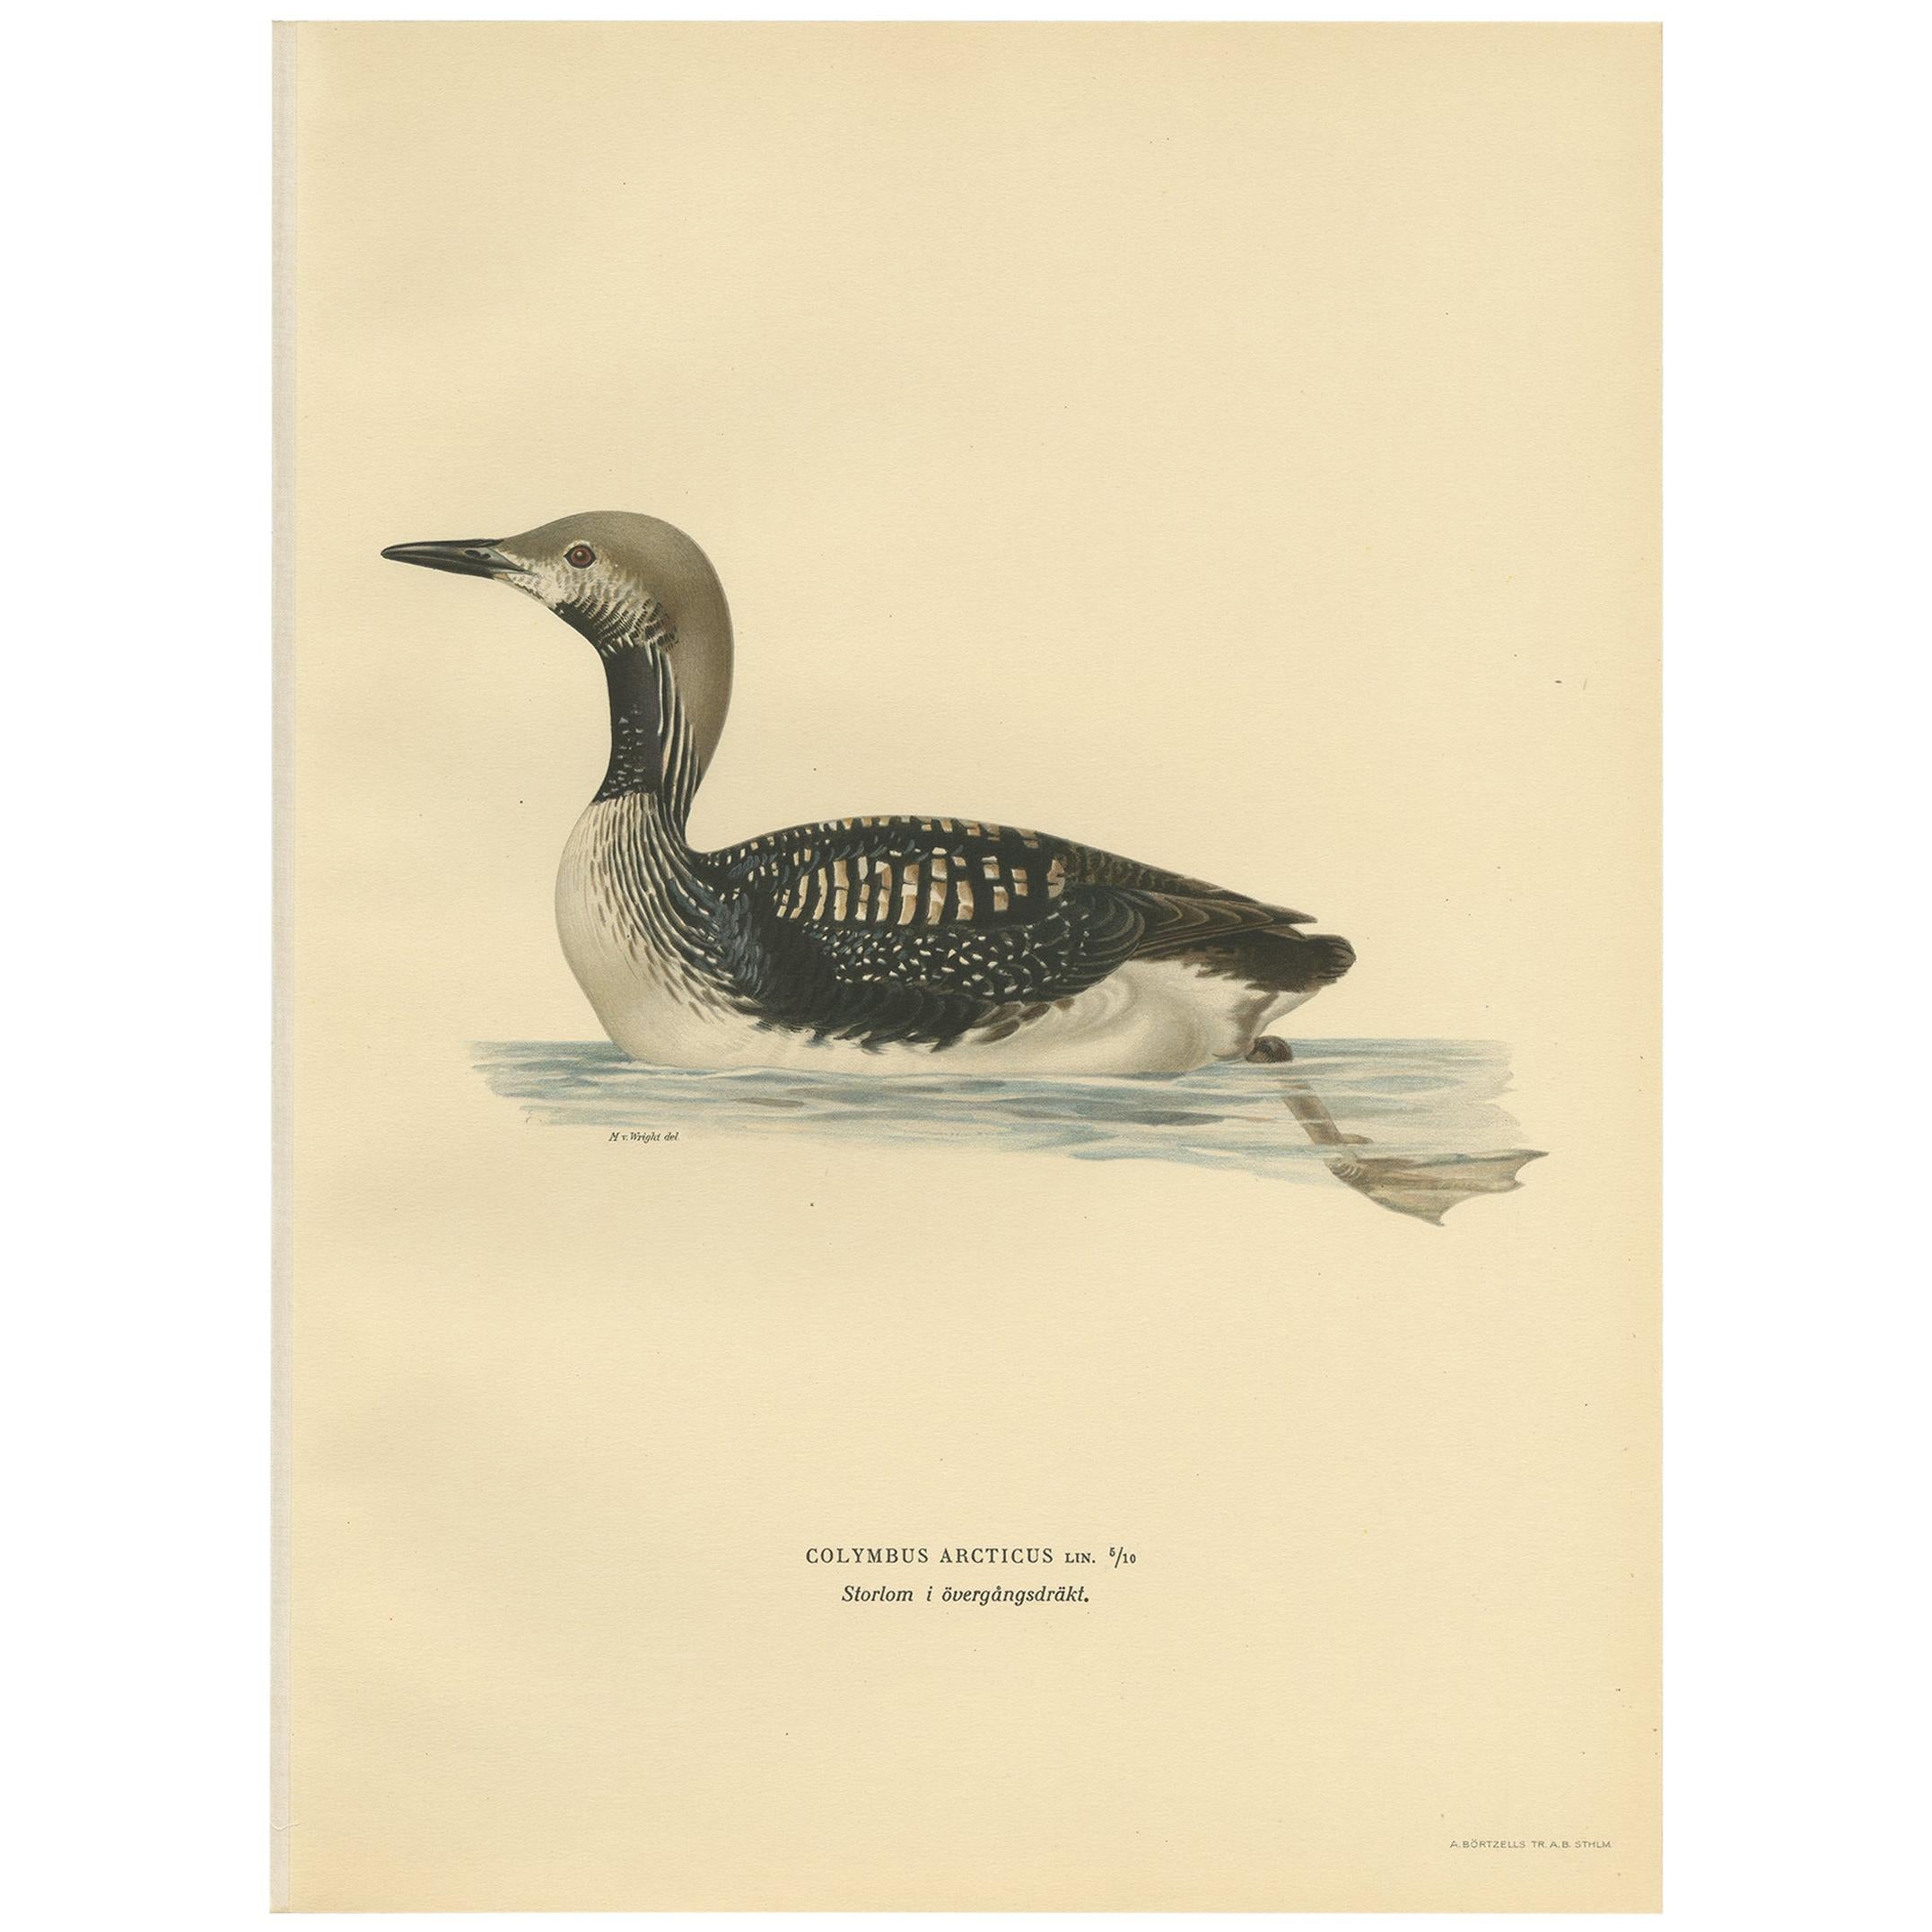 Antique Bird Print of the Black-Throated Loon by Von Wright, '1929'